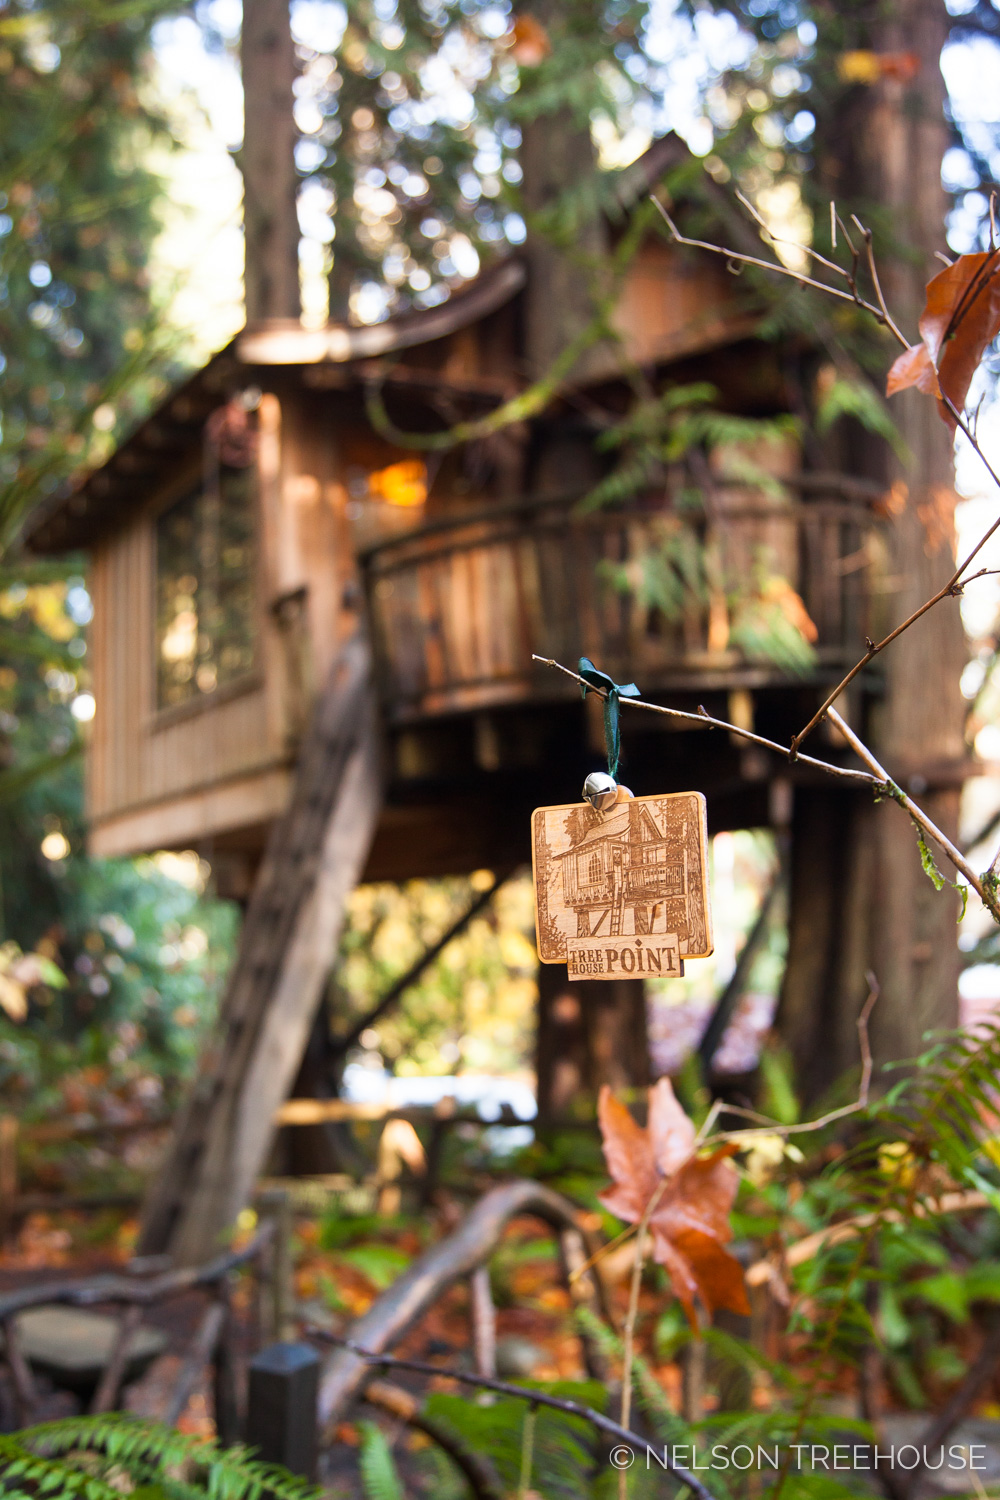  Upper Pond Treehouse Point Ornament 